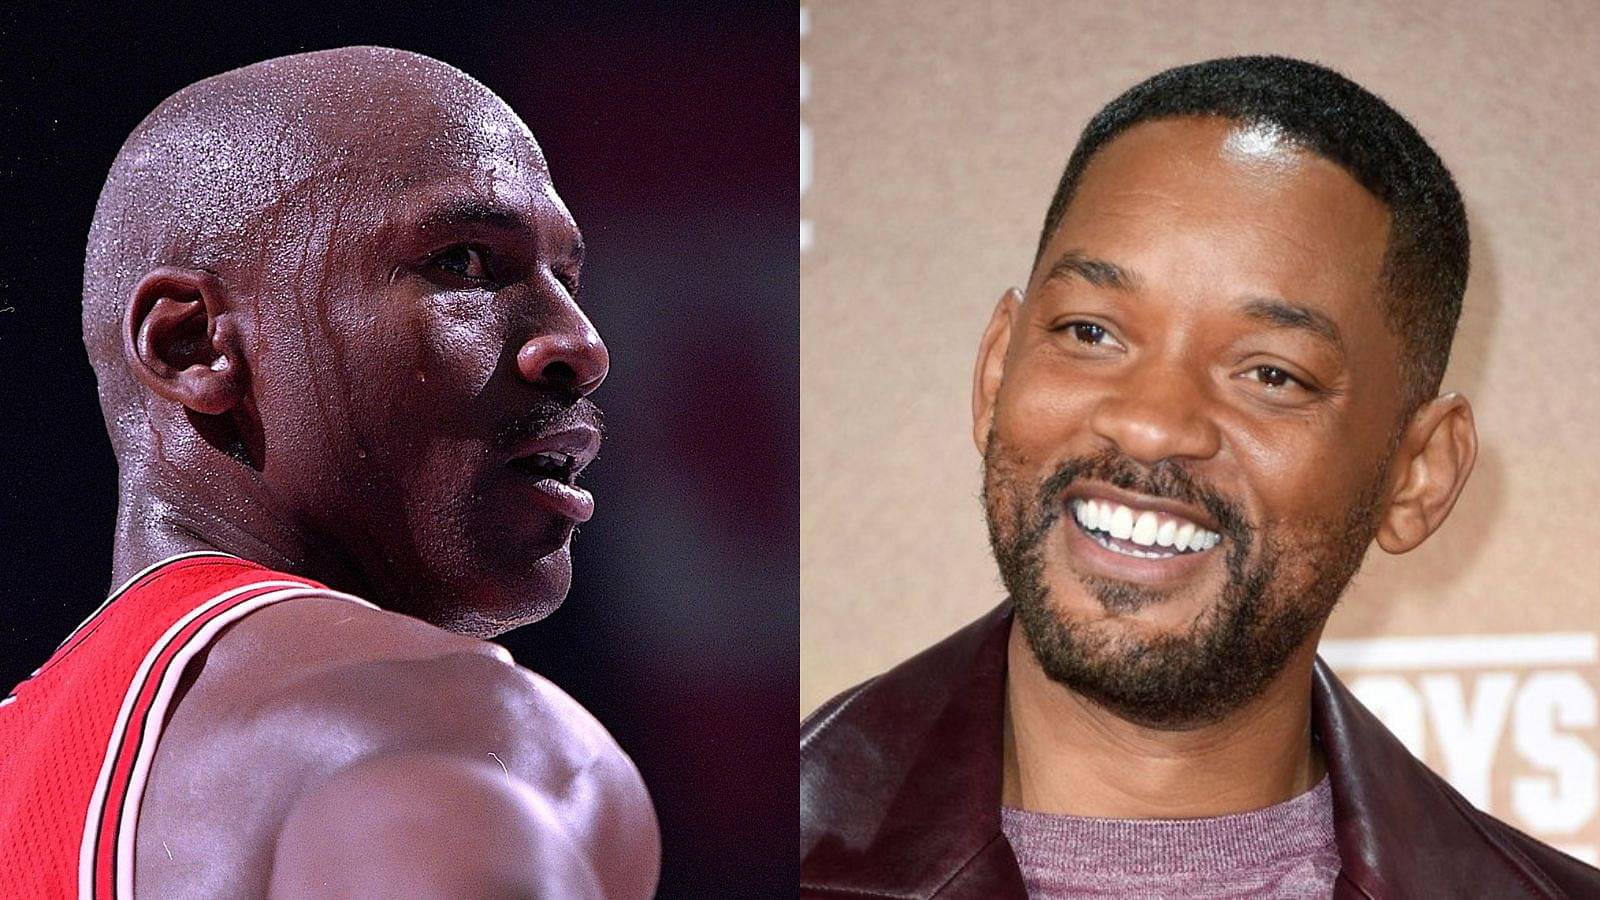 "I Was Literally Begging Michael Jordan to Let Wear the New Shoes": Will Smith Speaks About Wanting to be the First Guy to Wear the Air Jordan V